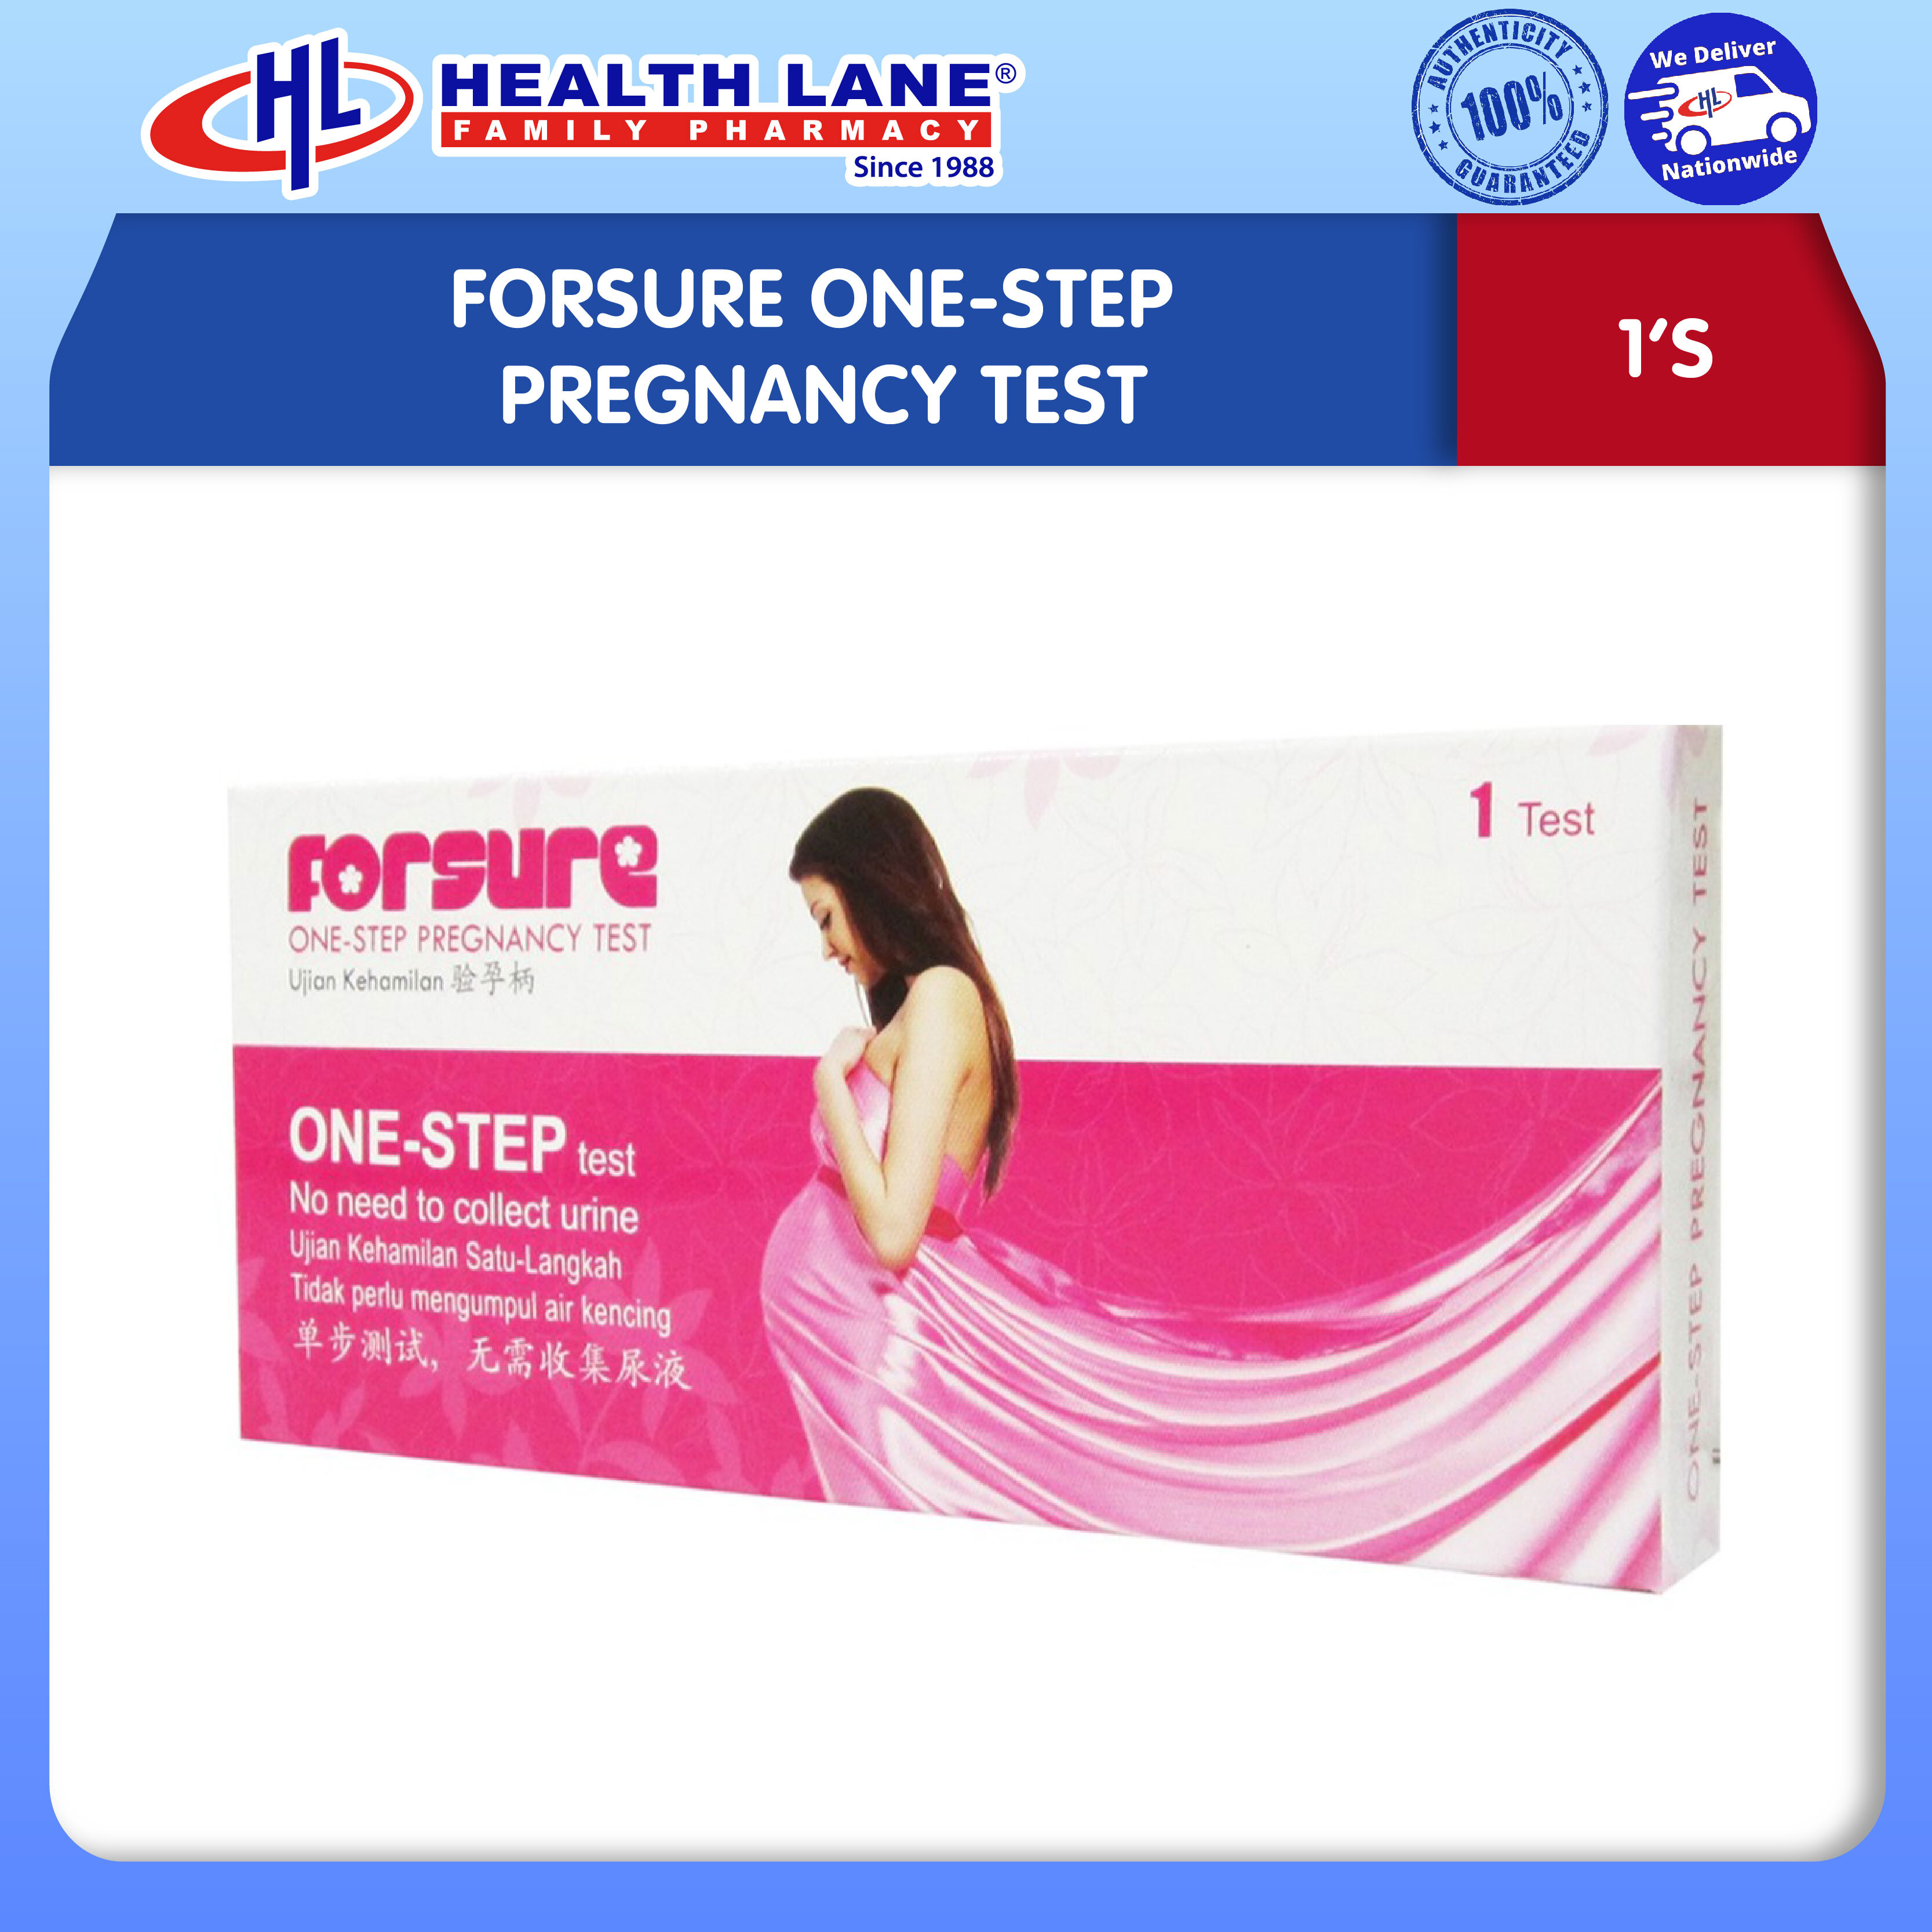 FORSURE ONE-STEP PREGNANCY TEST